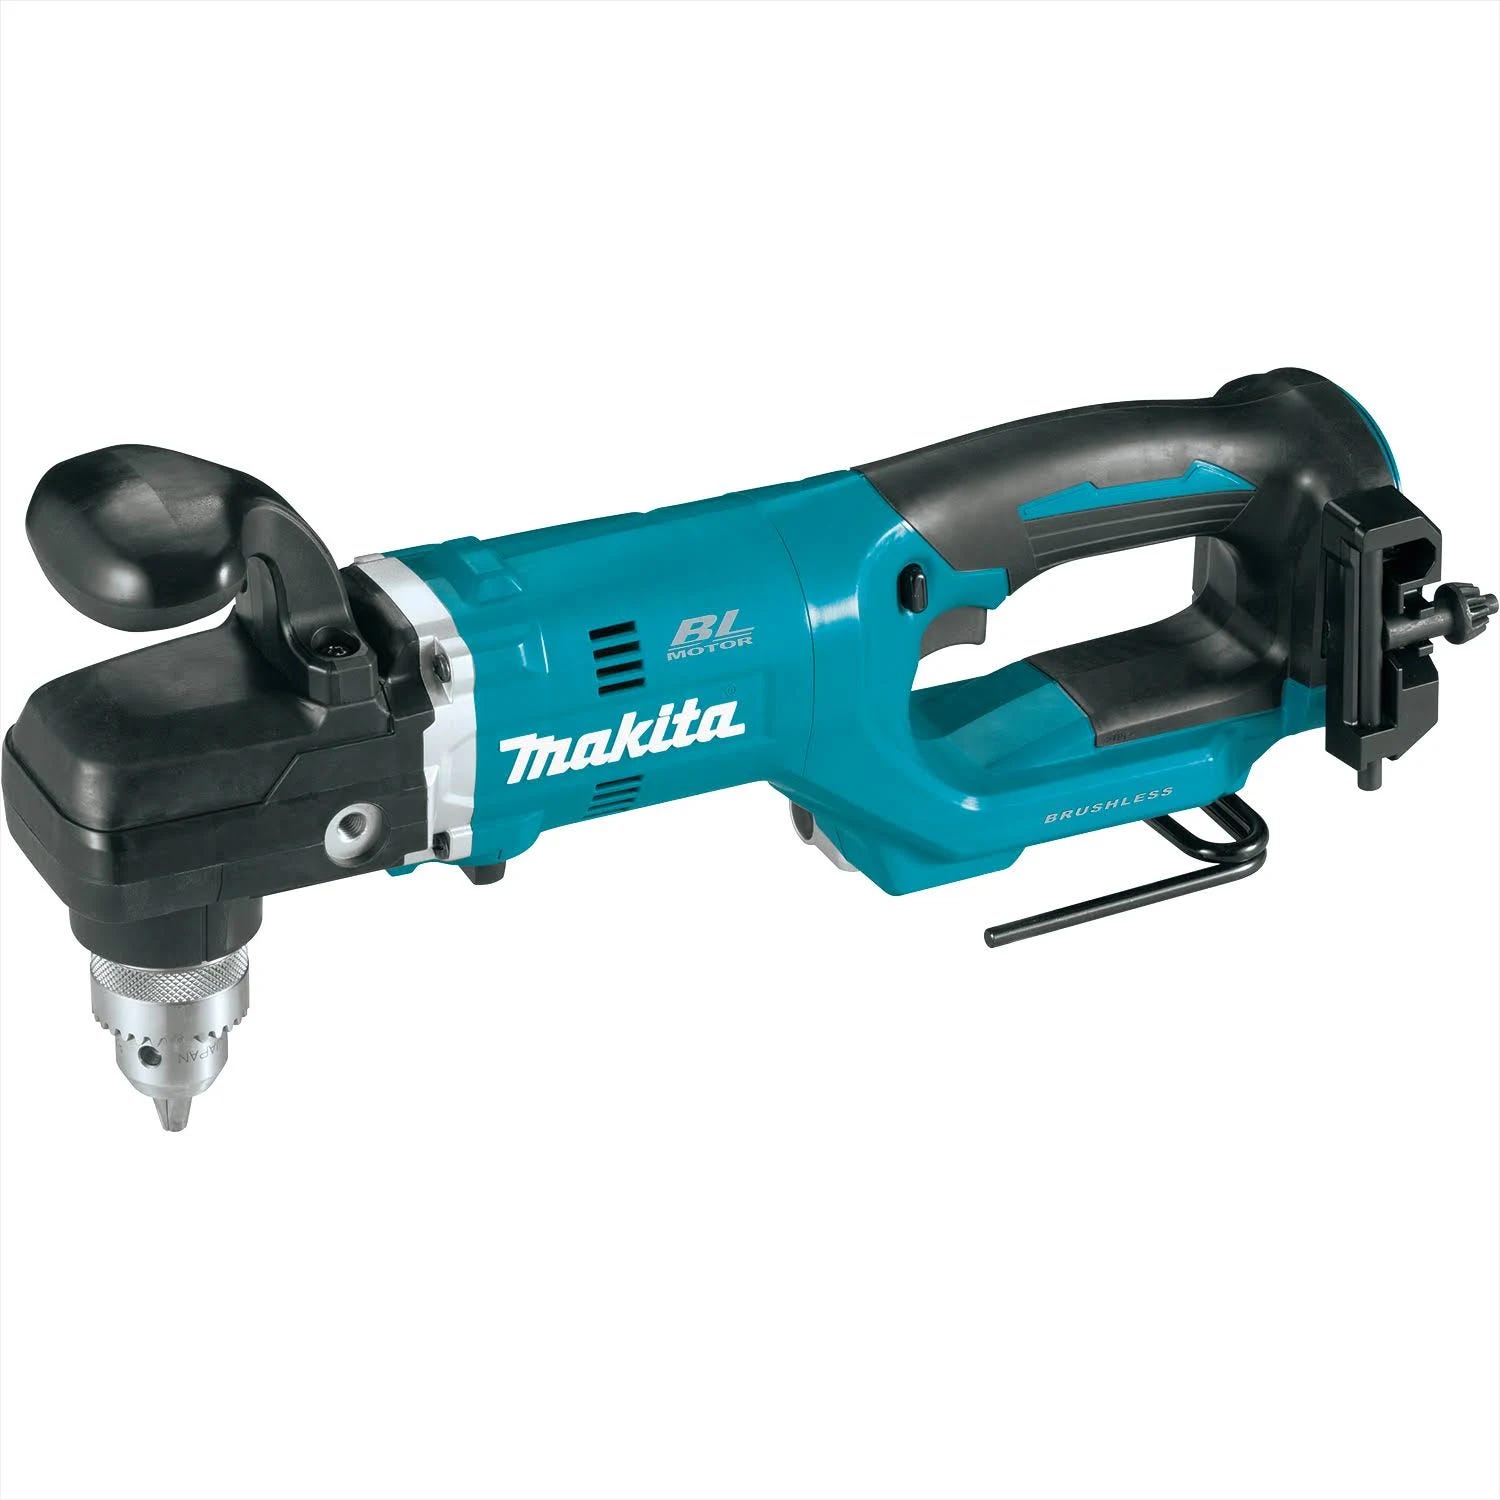 Makita XAD05Z 18V Cordless 1/2 in. Right Angle Drill - Brushless and Efficient | Image